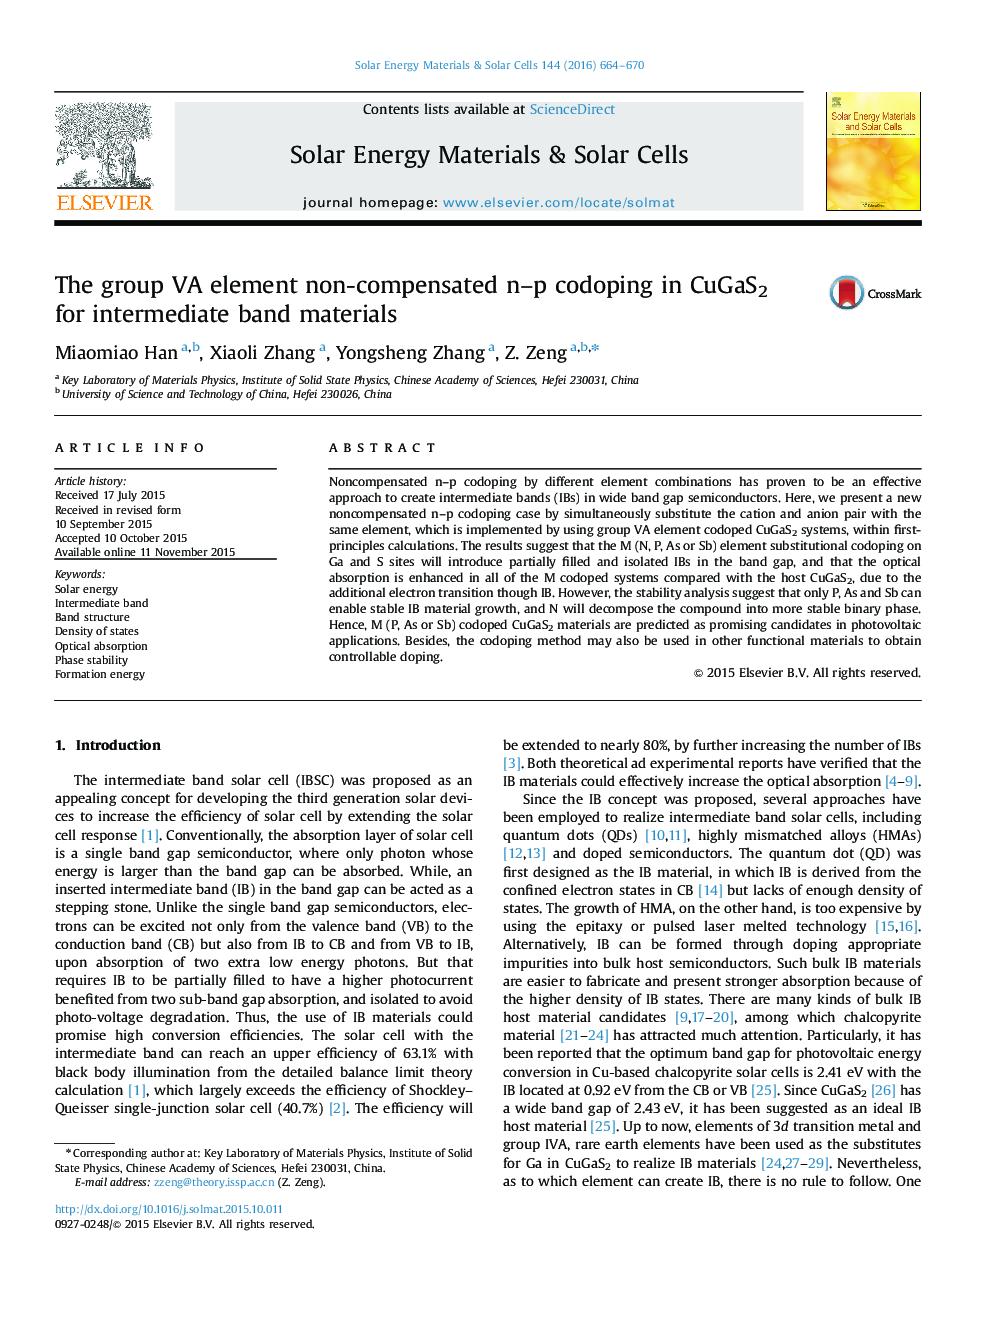 The group VA element non-compensated n-p codoping in CuGaS2 for intermediate band materials